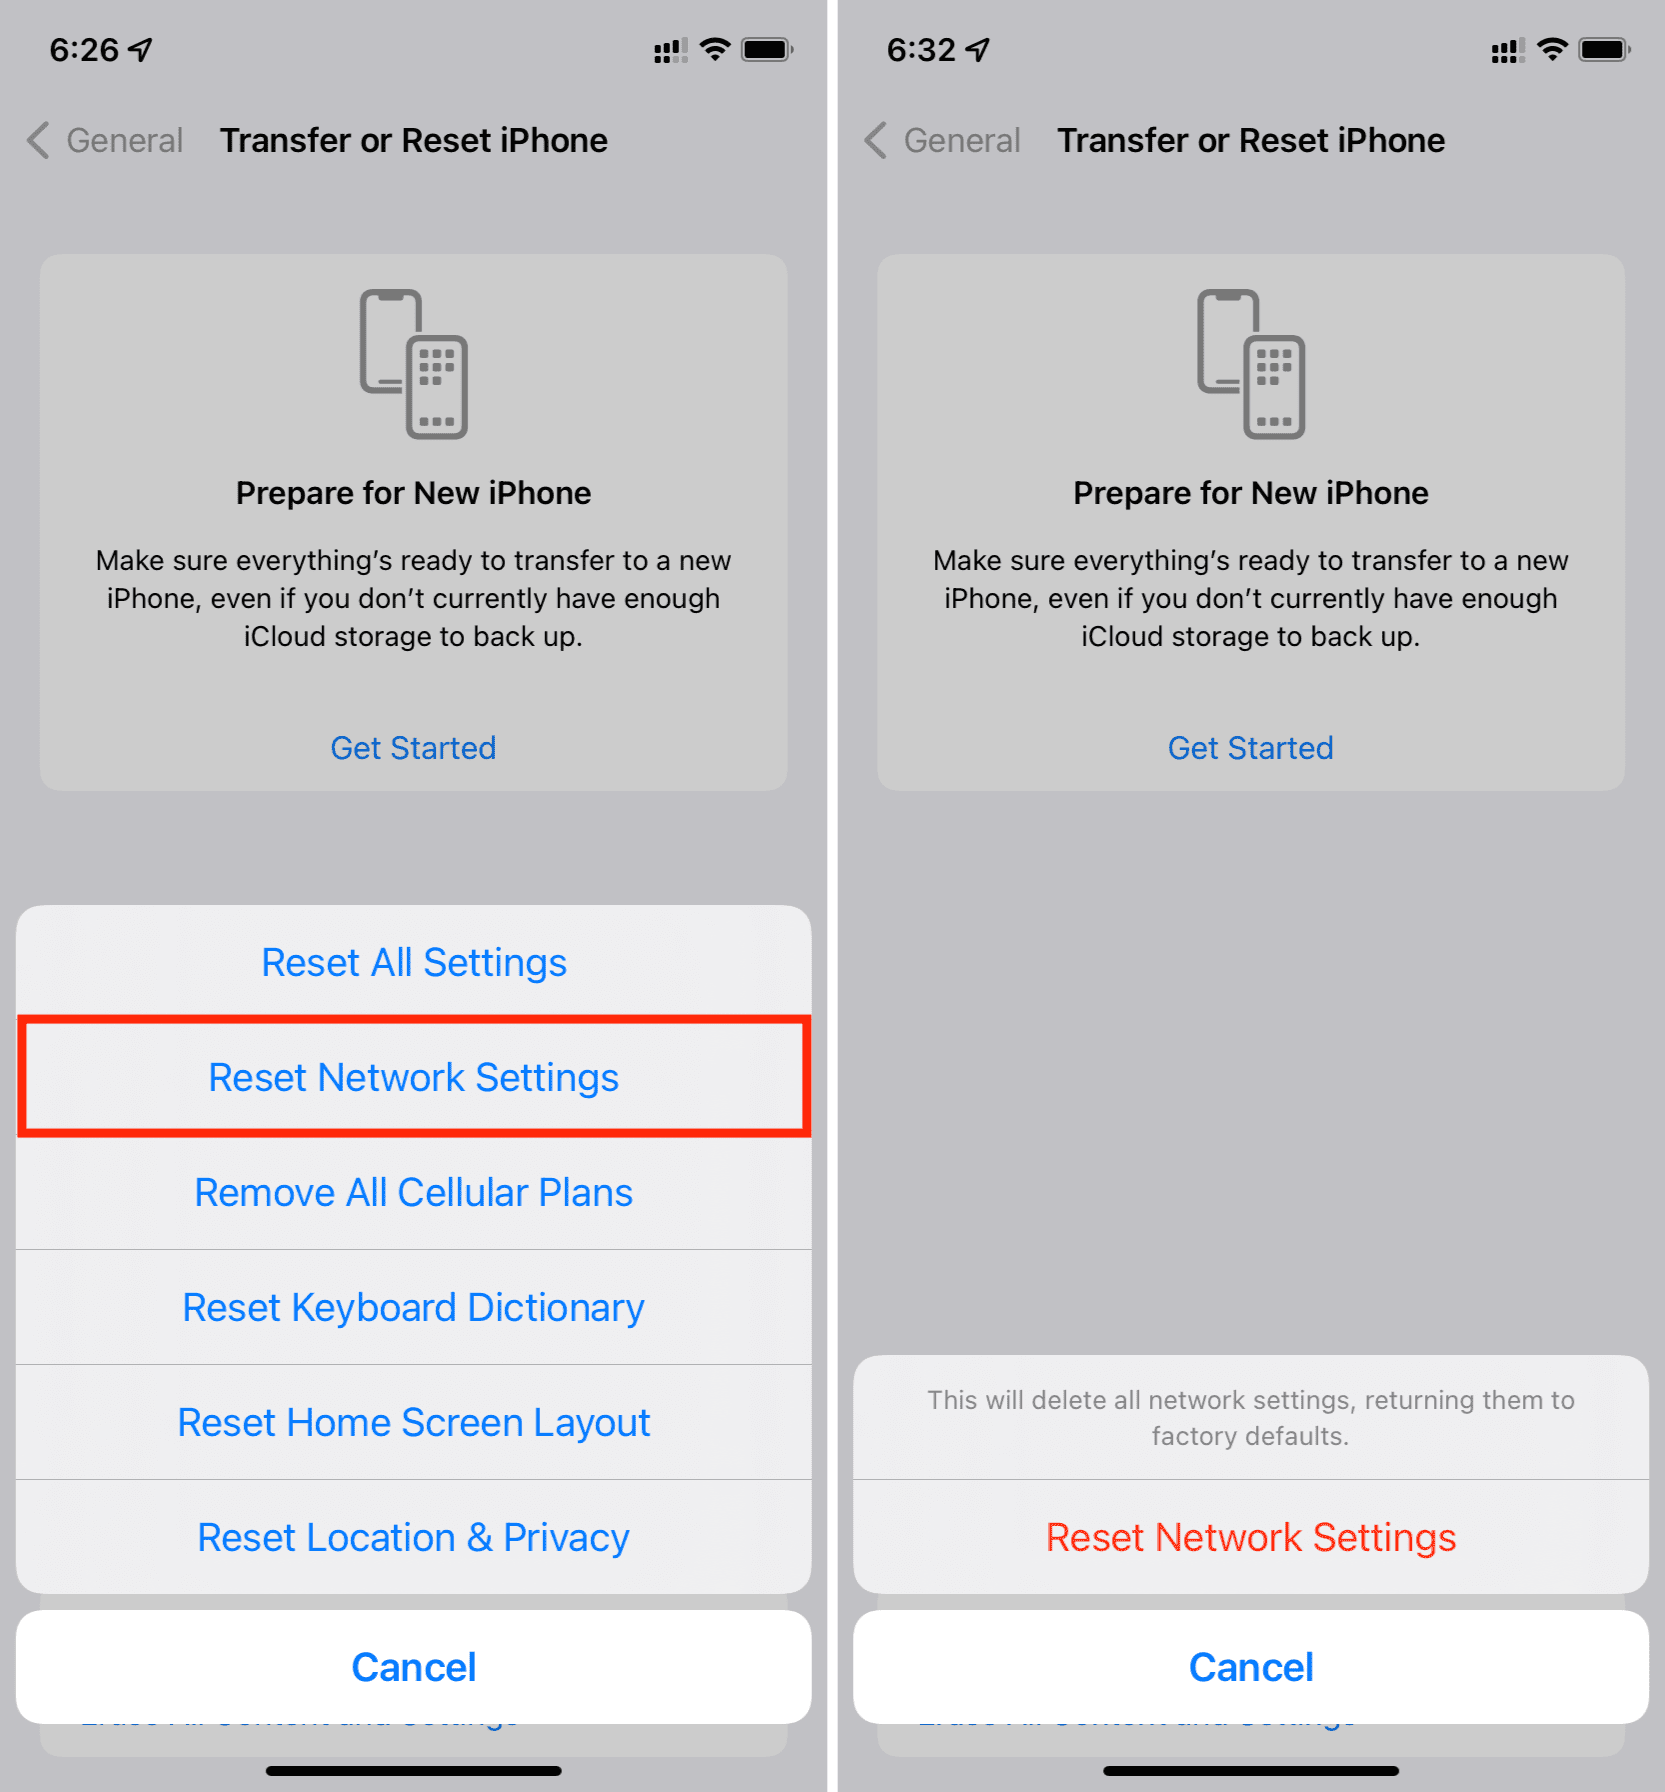 Confirm the reset by tapping on Reset settings or Reset network settings.
Restart your device after the reset is complete.